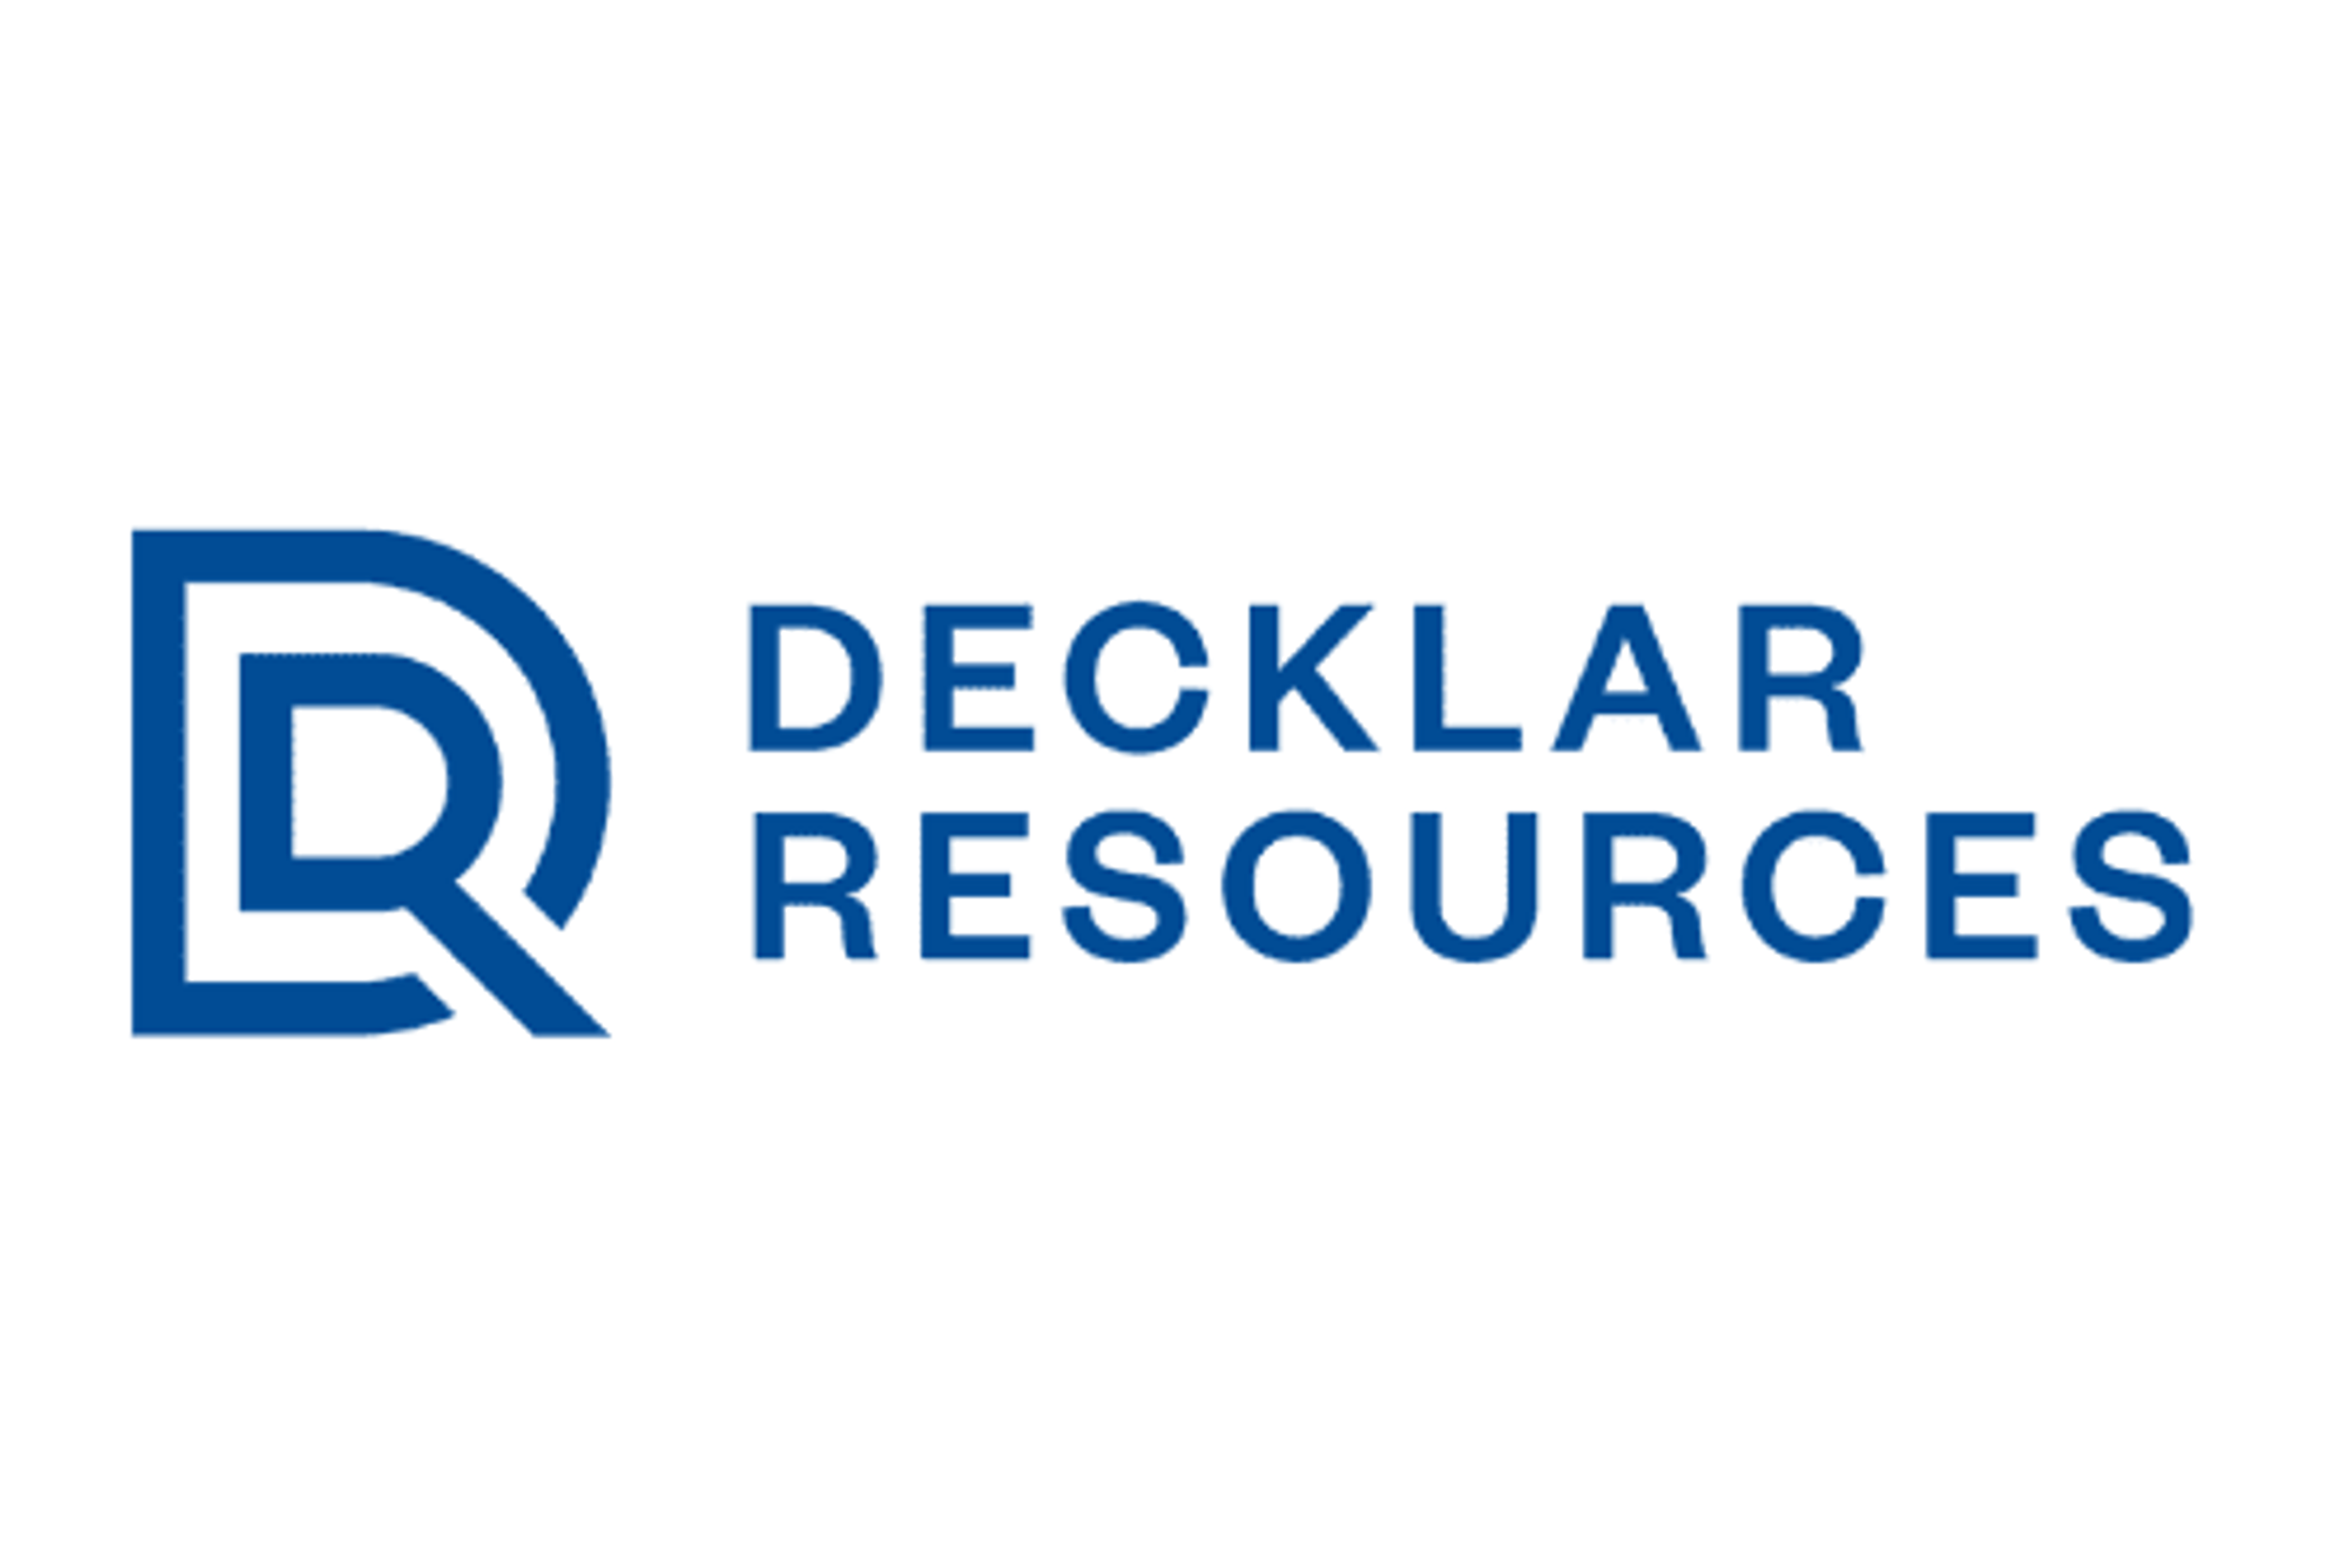 Decklar Resources Inc. Announces Closing of Funding Transaction With San Leon Energy